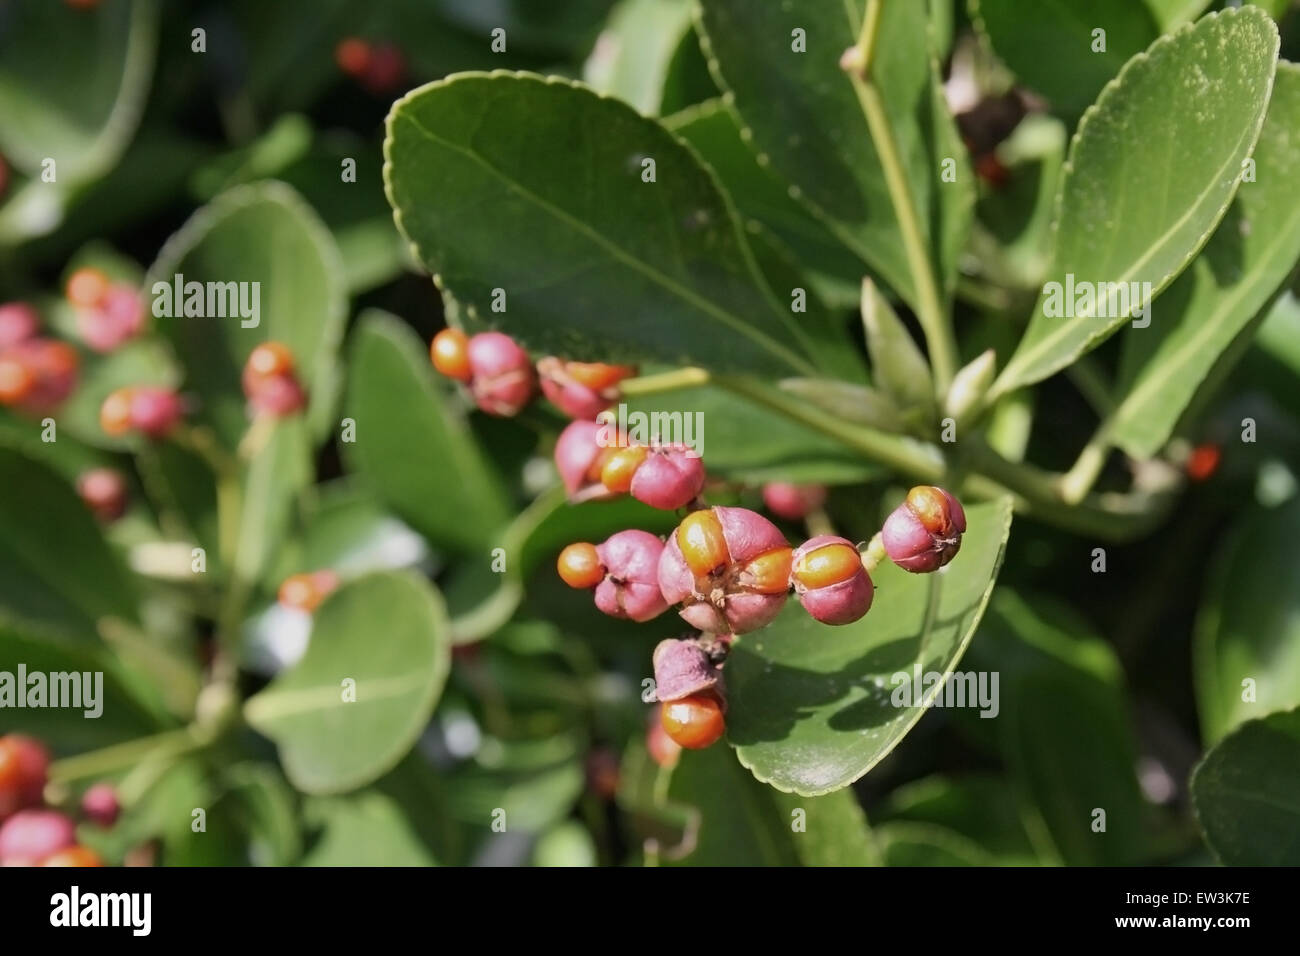 Japanese Spindle Euonymus Japonicus Close Up Of Fruit Growing In Garden Hedge Mendlesham Suffolk England March Stock Photo Alamy